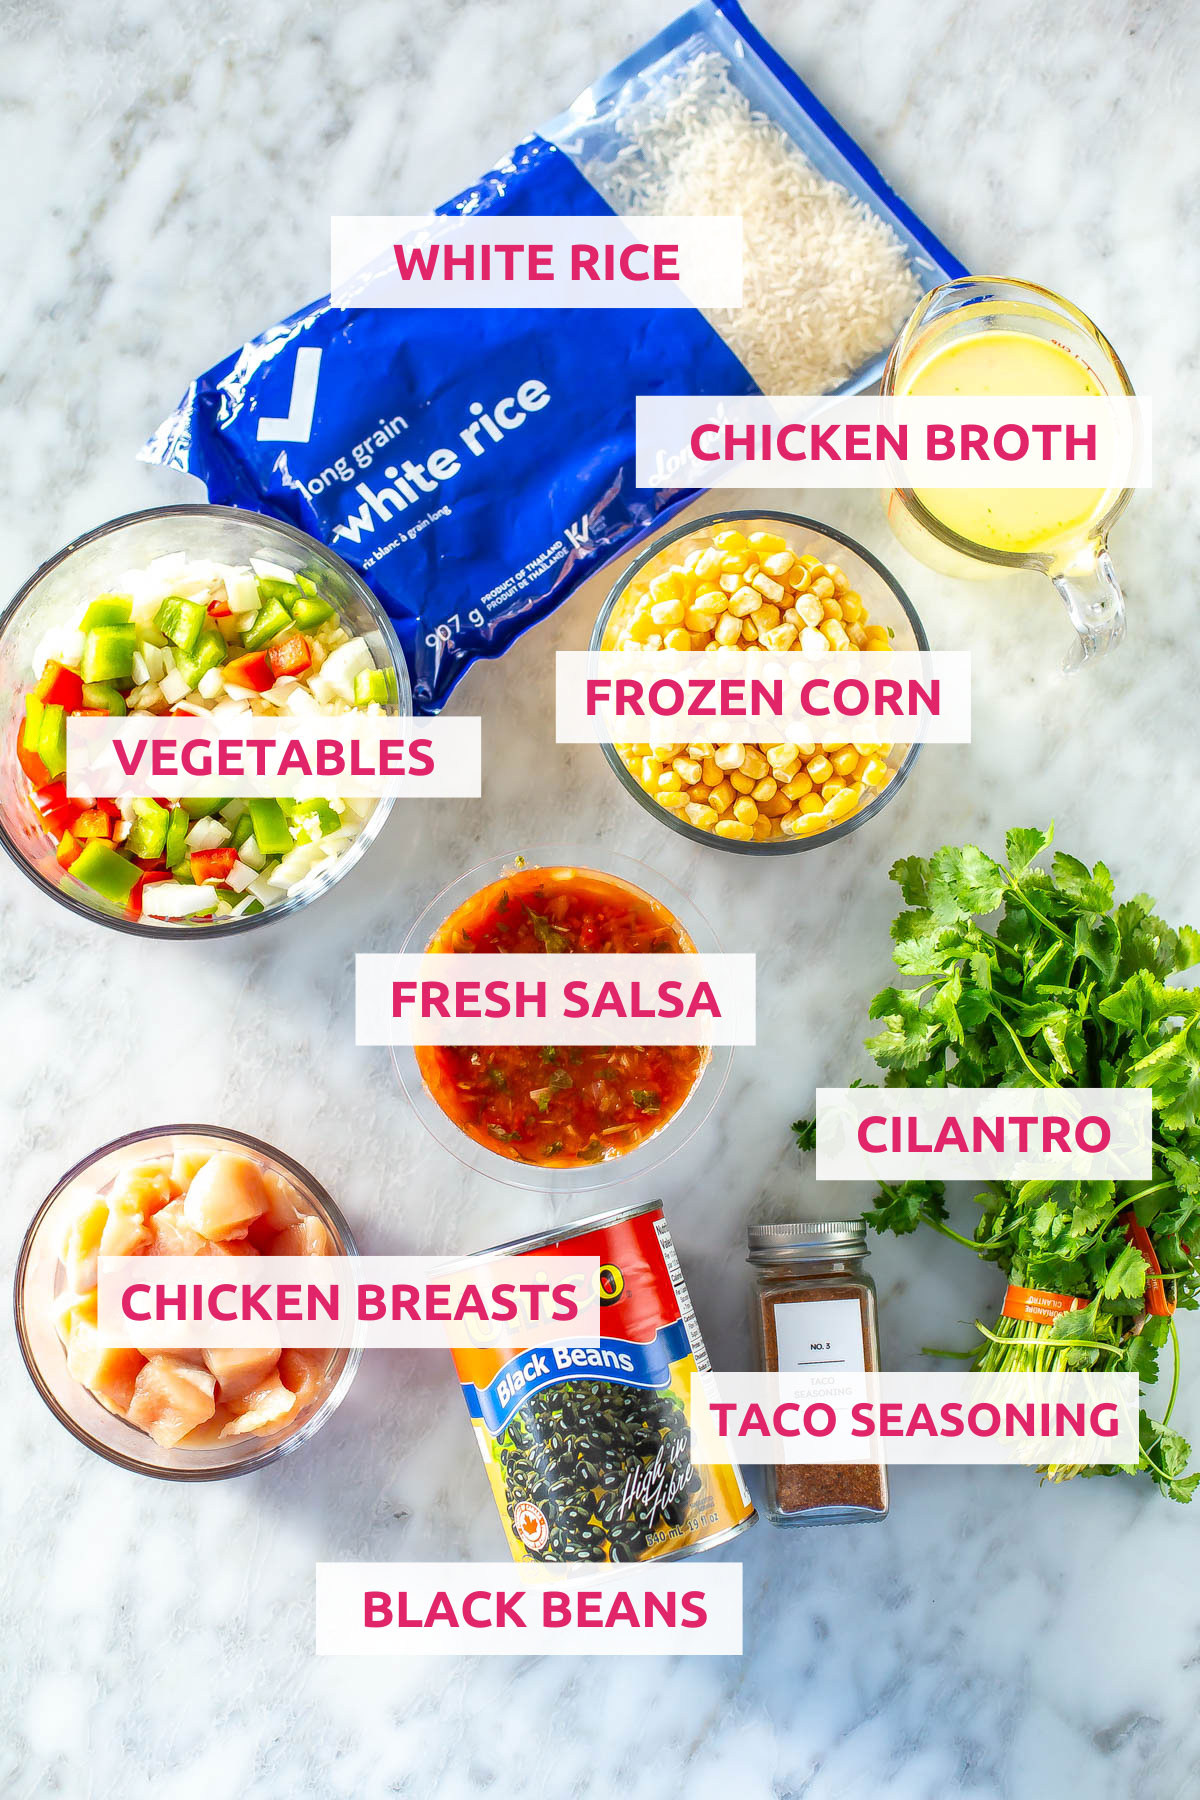 Ingredients for Instant Pot Chicken Burrito Bowls: white rice, vegetables, chicken broth, frozen corn, chicken breasts, salsa, black beans, taco seasoning and cilantro.